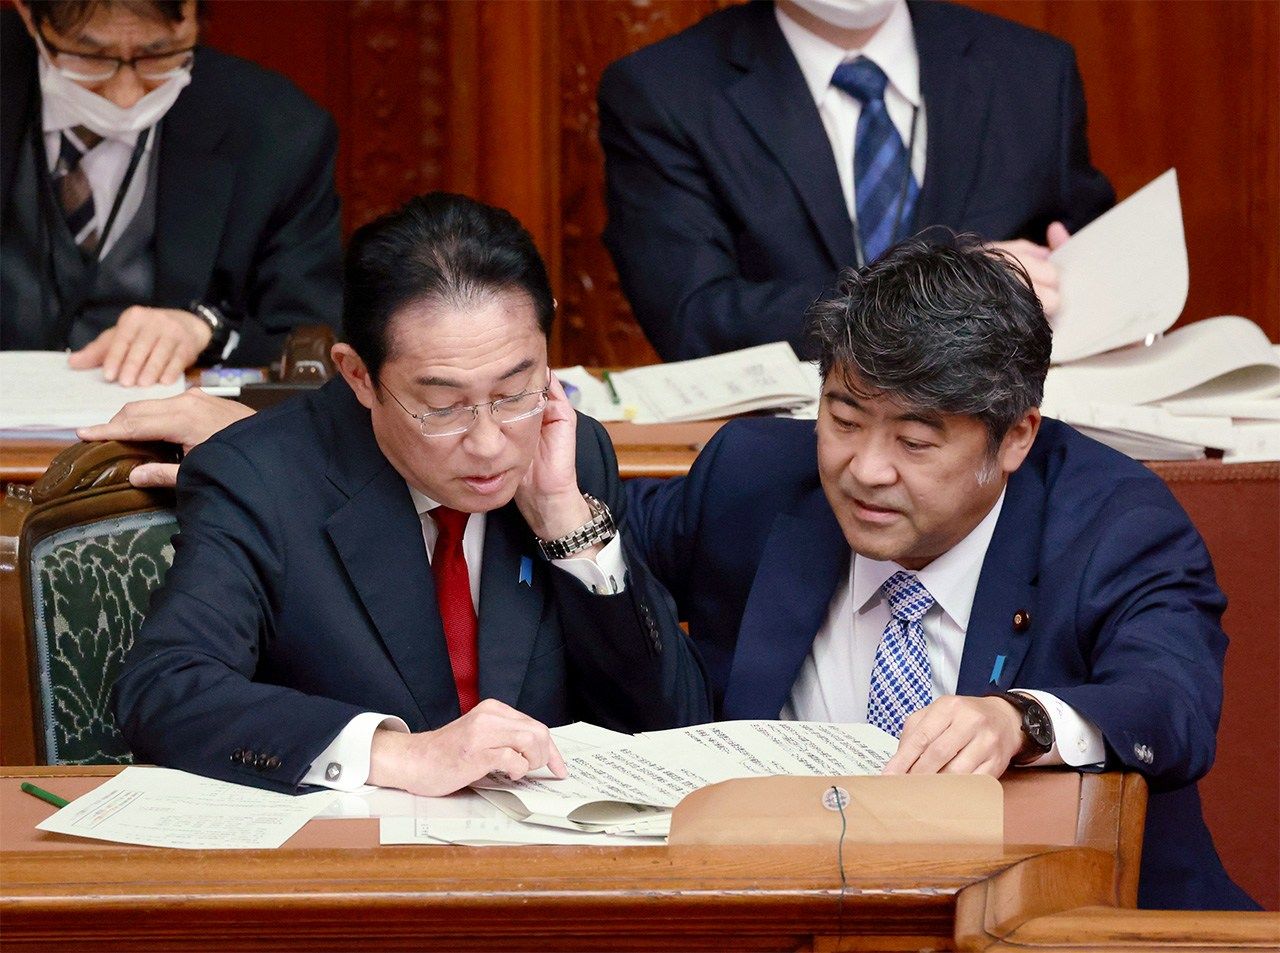 Prime Minister Kishida Fumio (left) and Deputy Chief Cabinet Secretary Kihara Seiji talk in the Diet during a plenary session after the announcement of the three key security documents at the House of Representatives, April 4, 2023. (© Jiji)